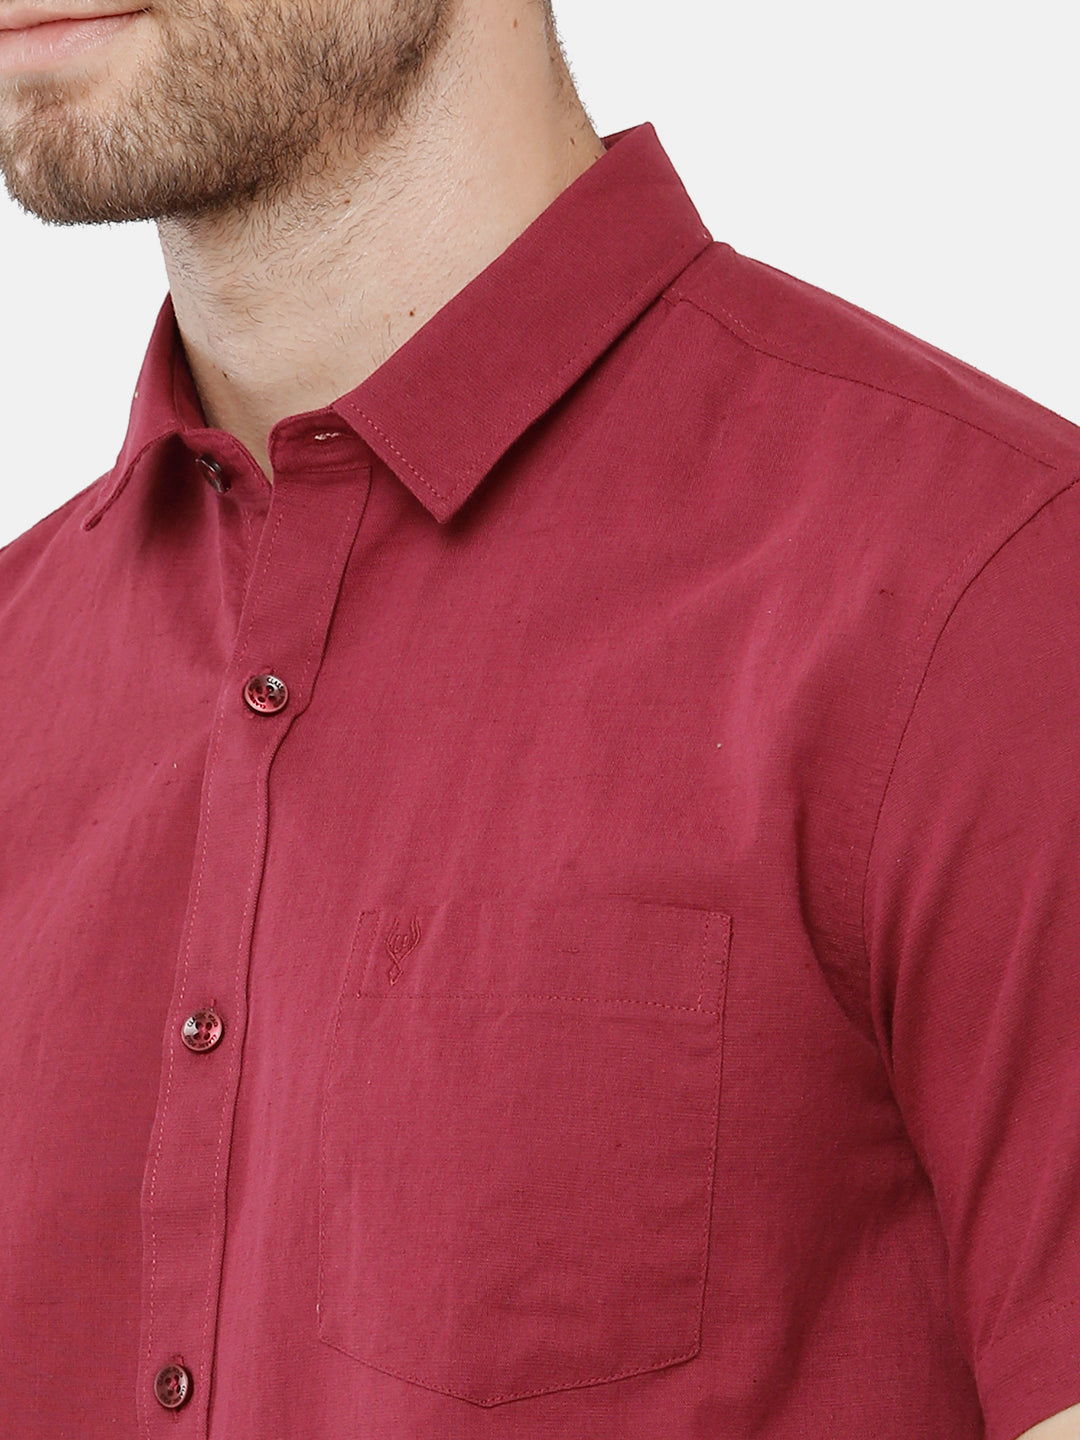 Classic Polo Mens Solid Milano Fit Half Sleeve Maroon Color Woven Shirt - Mica Maroon HS